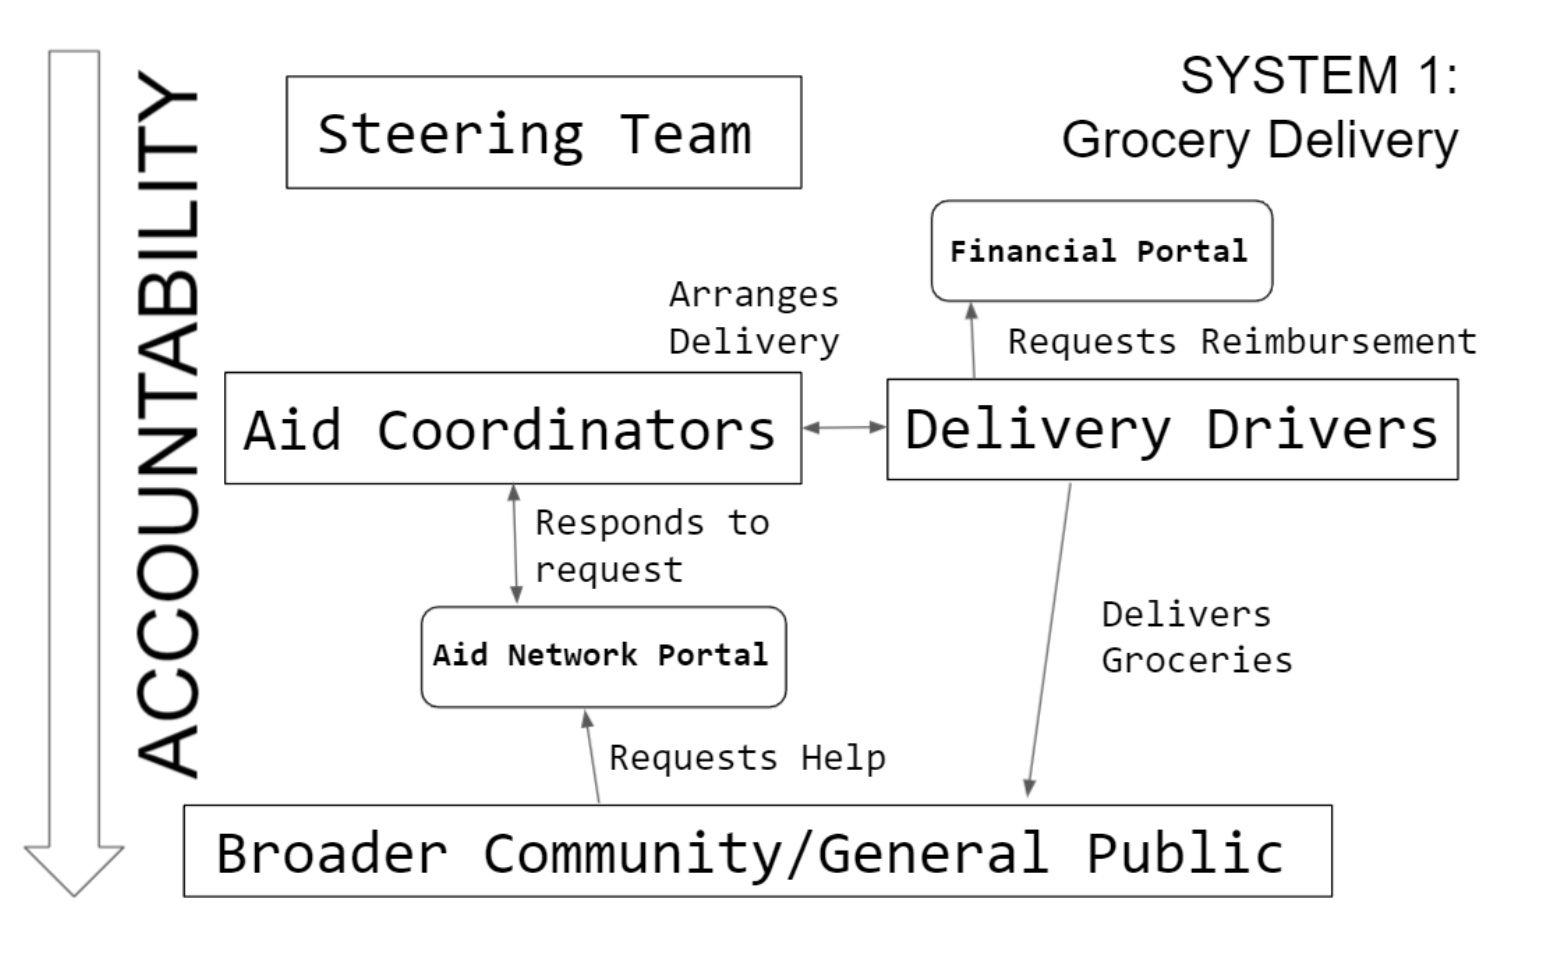 A diagram of System 1 showing a line of accountability